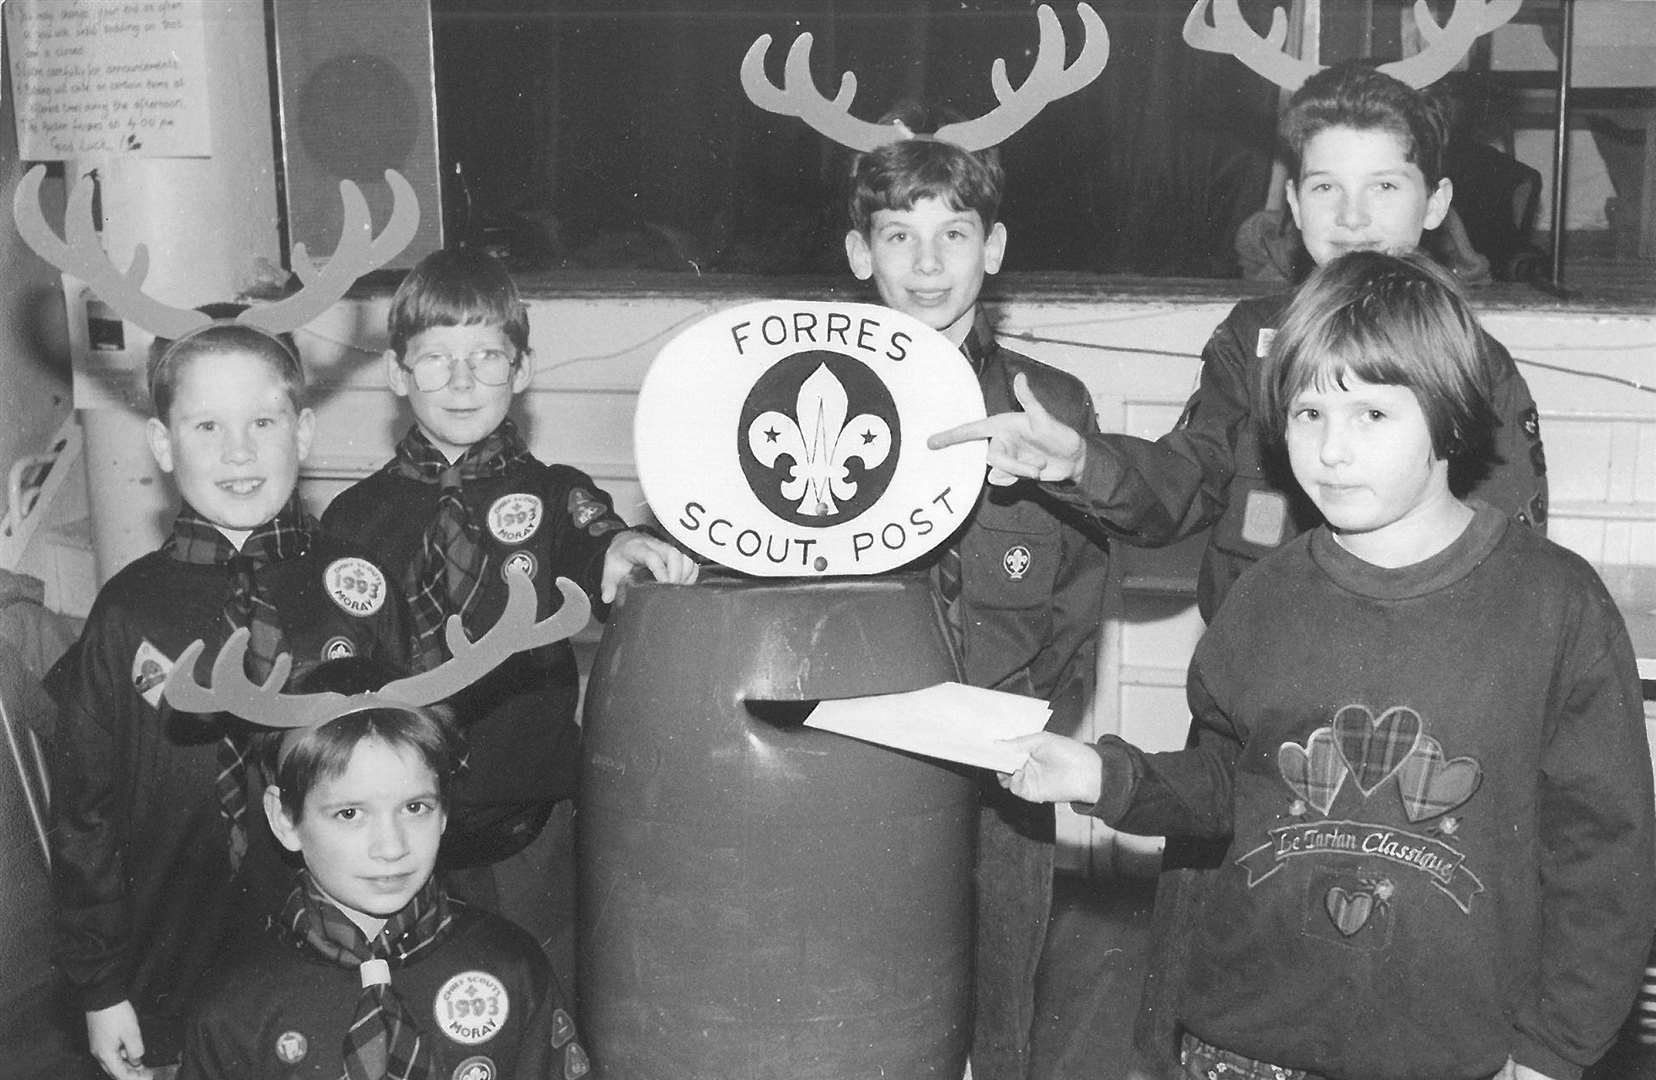 Amy steer (9) using the Forres Scouts post in 1993.